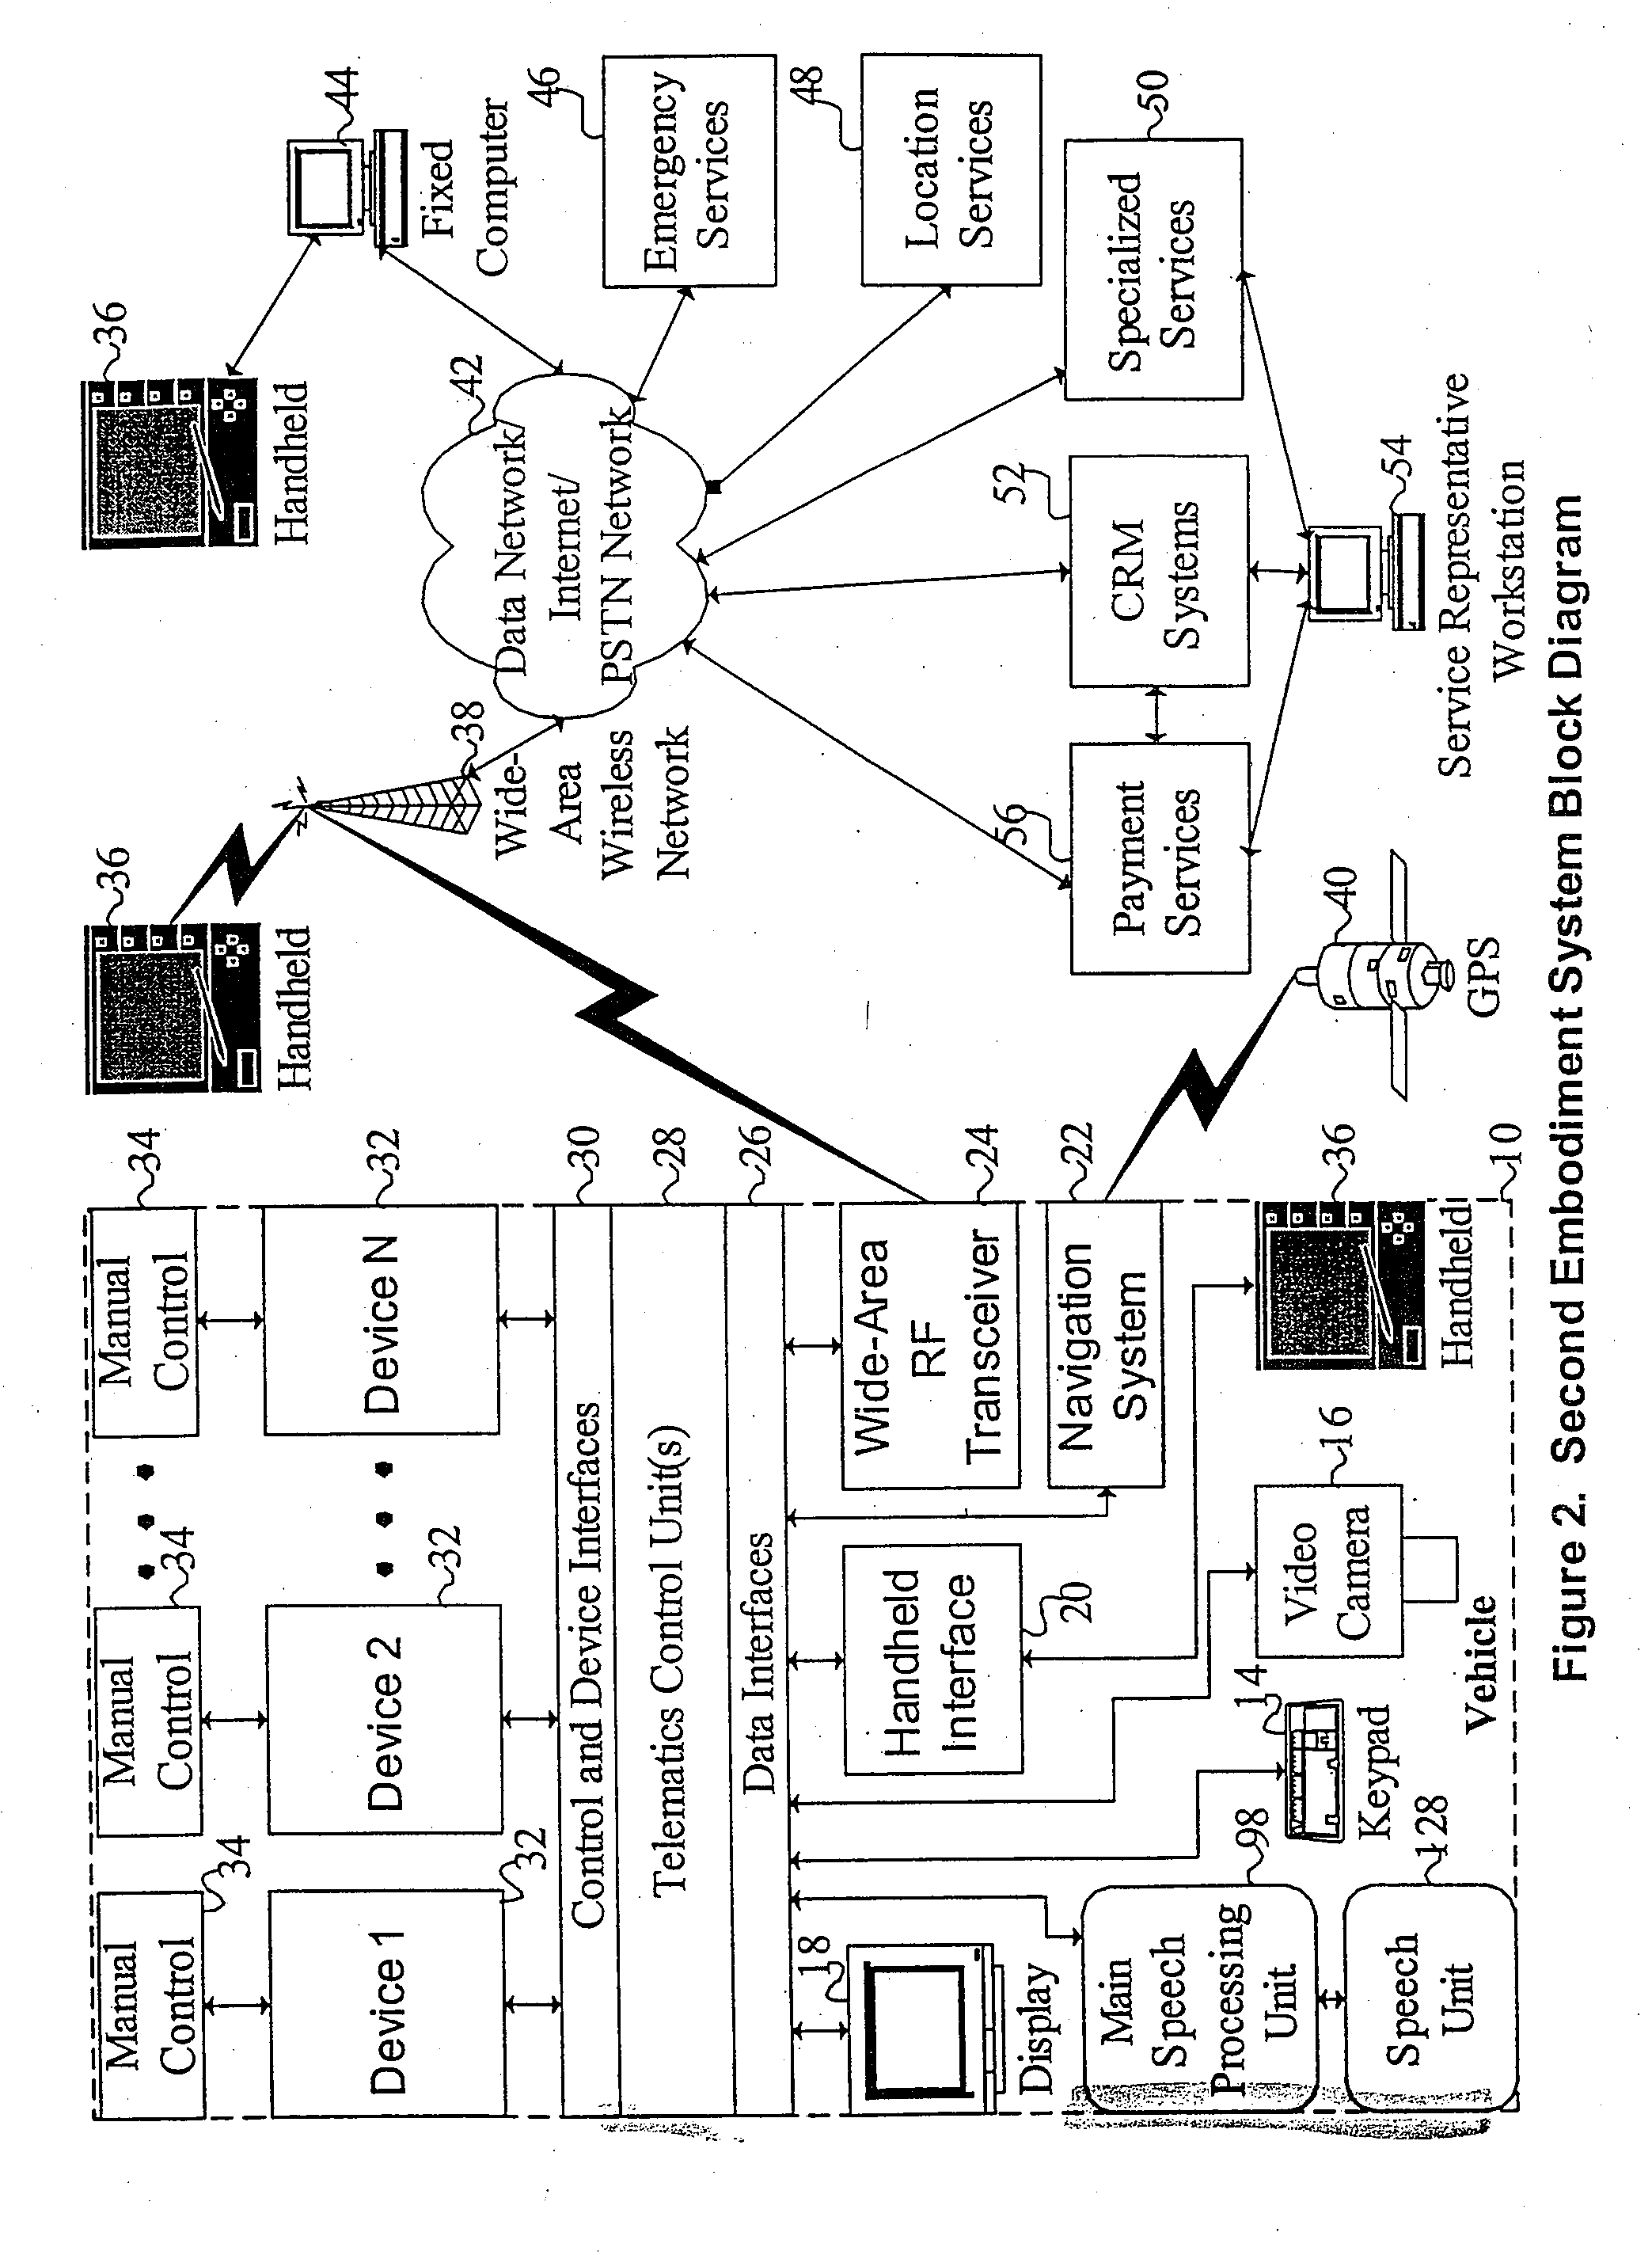 Mobile systems and methods for responding to natural language speech utterance